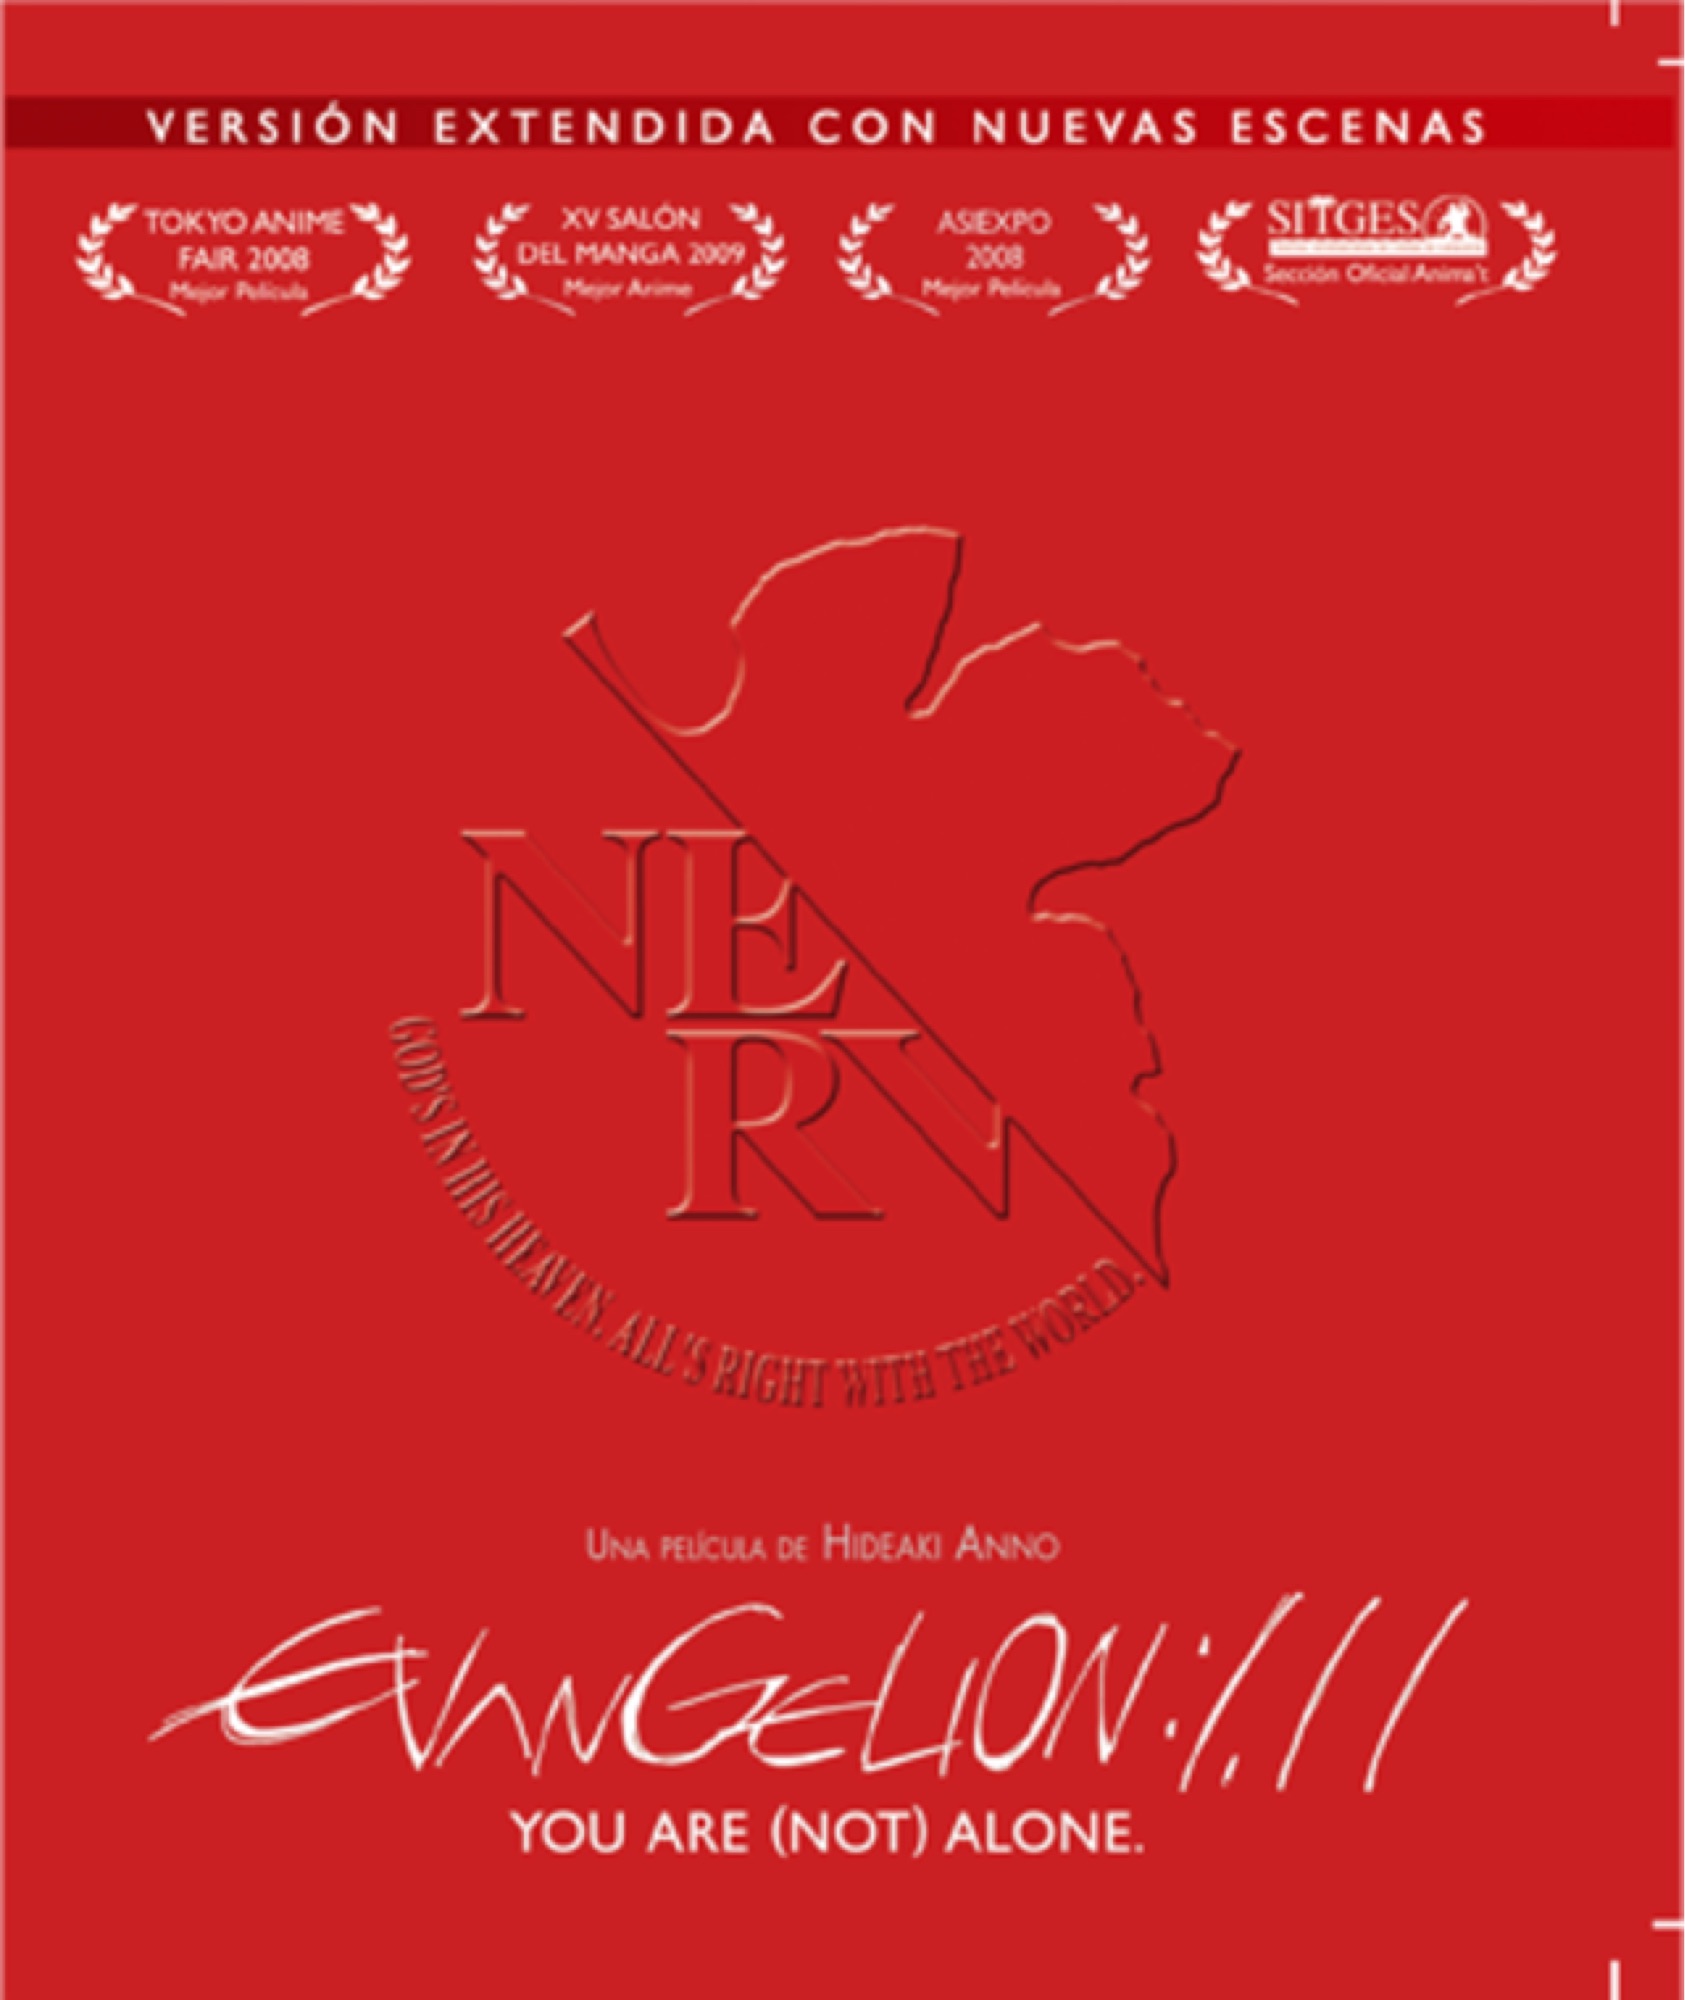 EVANGELION 1.11 YOU ARE (NOT) ALONE BD